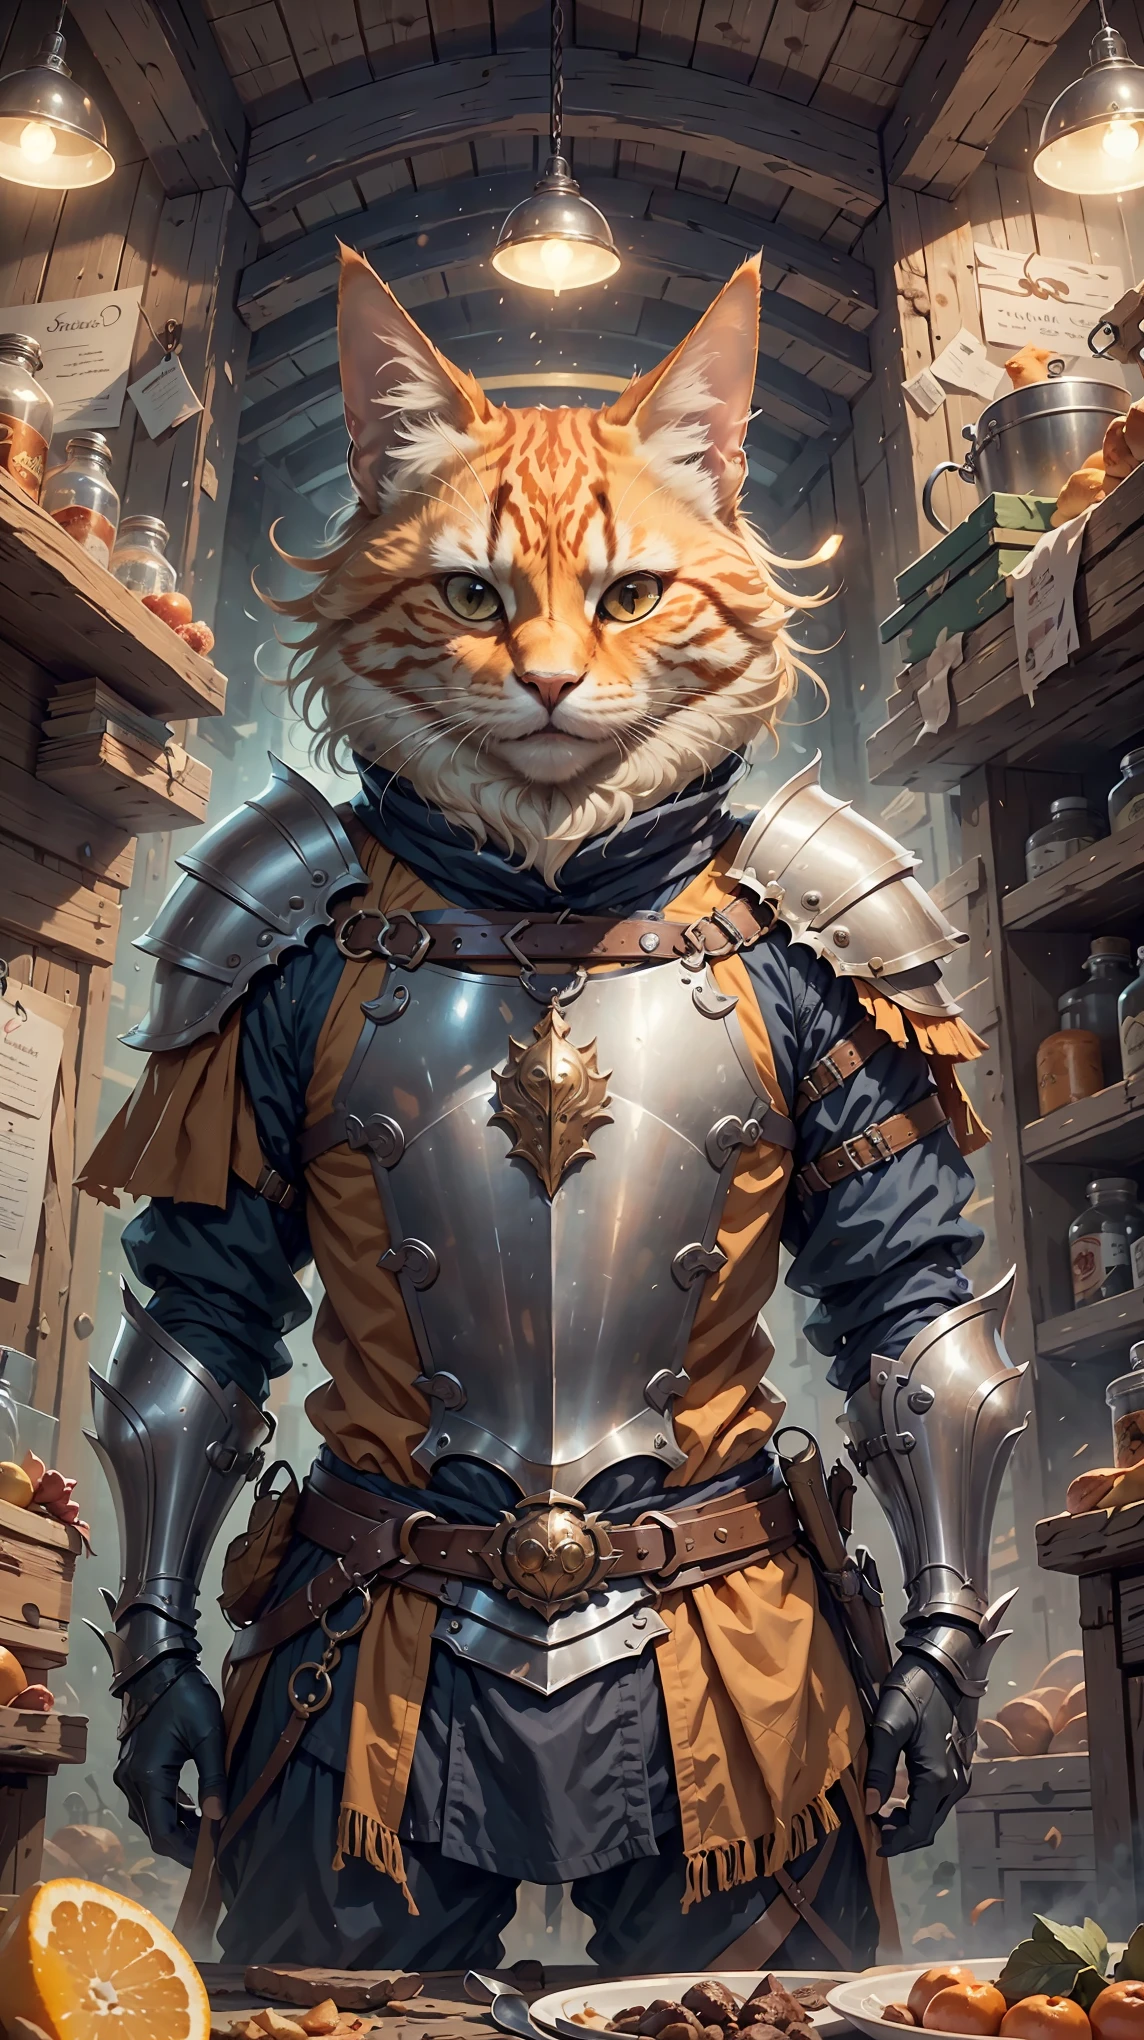 masterpiece, concept art, anthropomorphism, dynamic pose, orange cat wearing knight armor, full plate armor, cute, c4ttitude, medieval barrack interior, hyper realistic, intricate detail, epic composition, epic proportion, HD